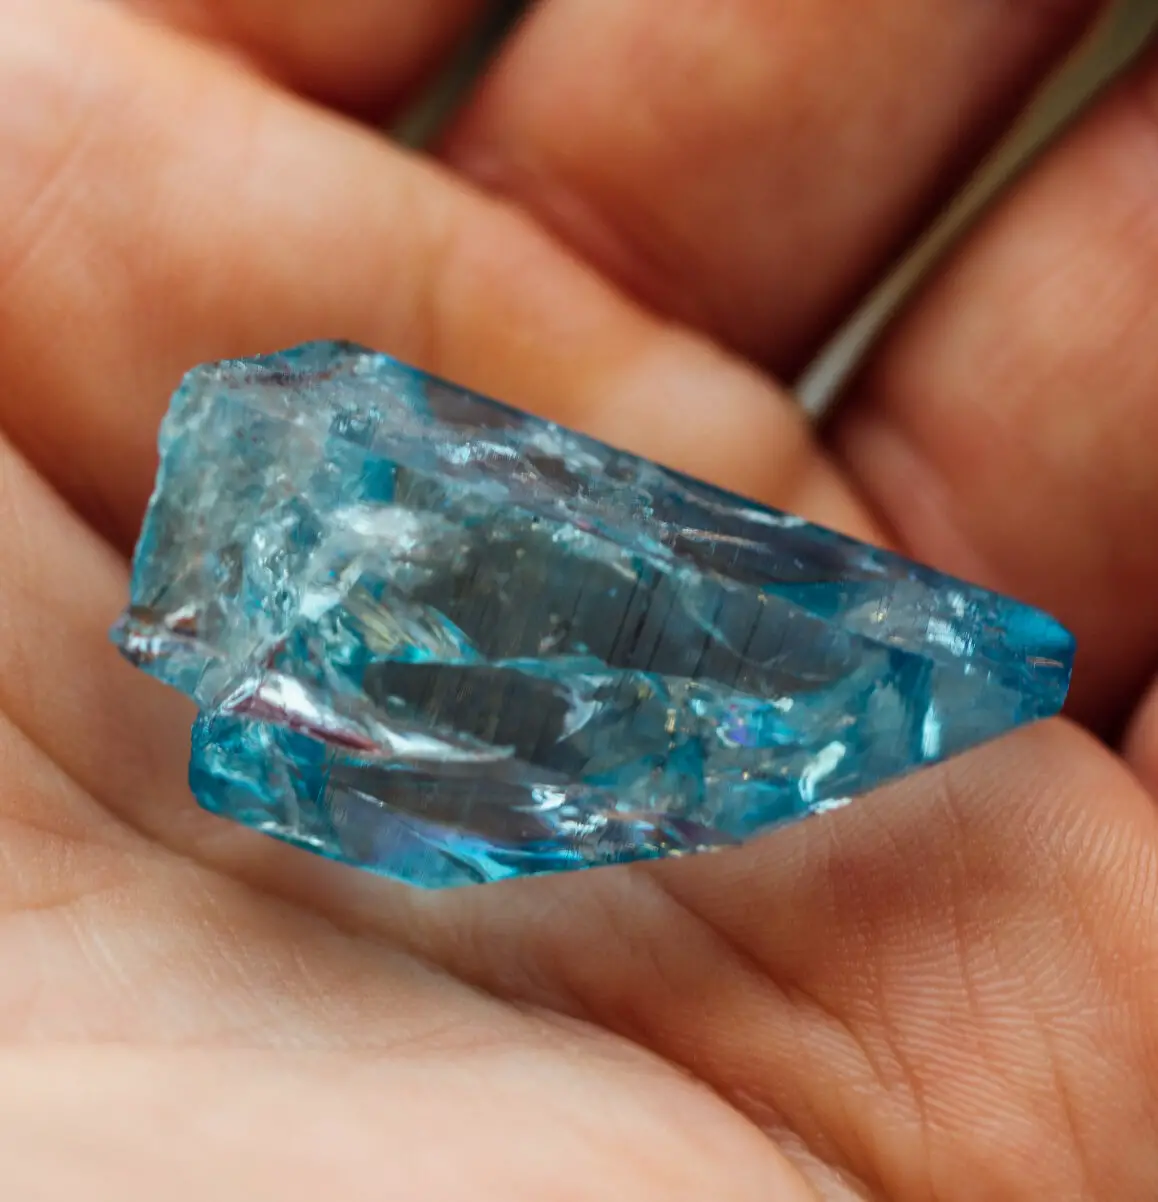 How to Tell if Aquamarine is Real or Fake